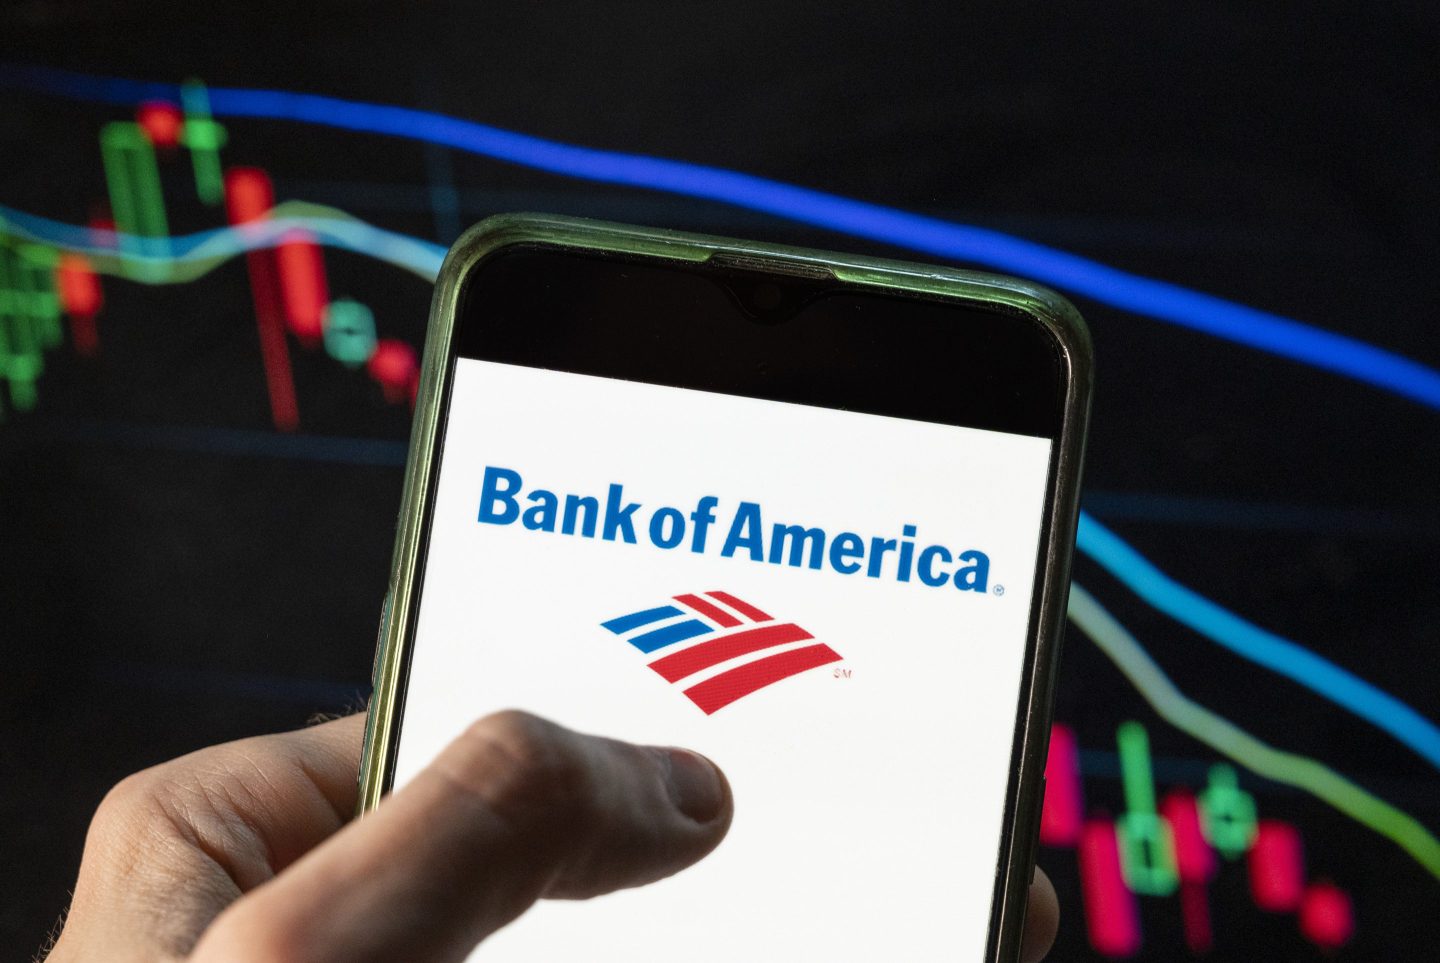 The Bank of America app being opened on a smart phone